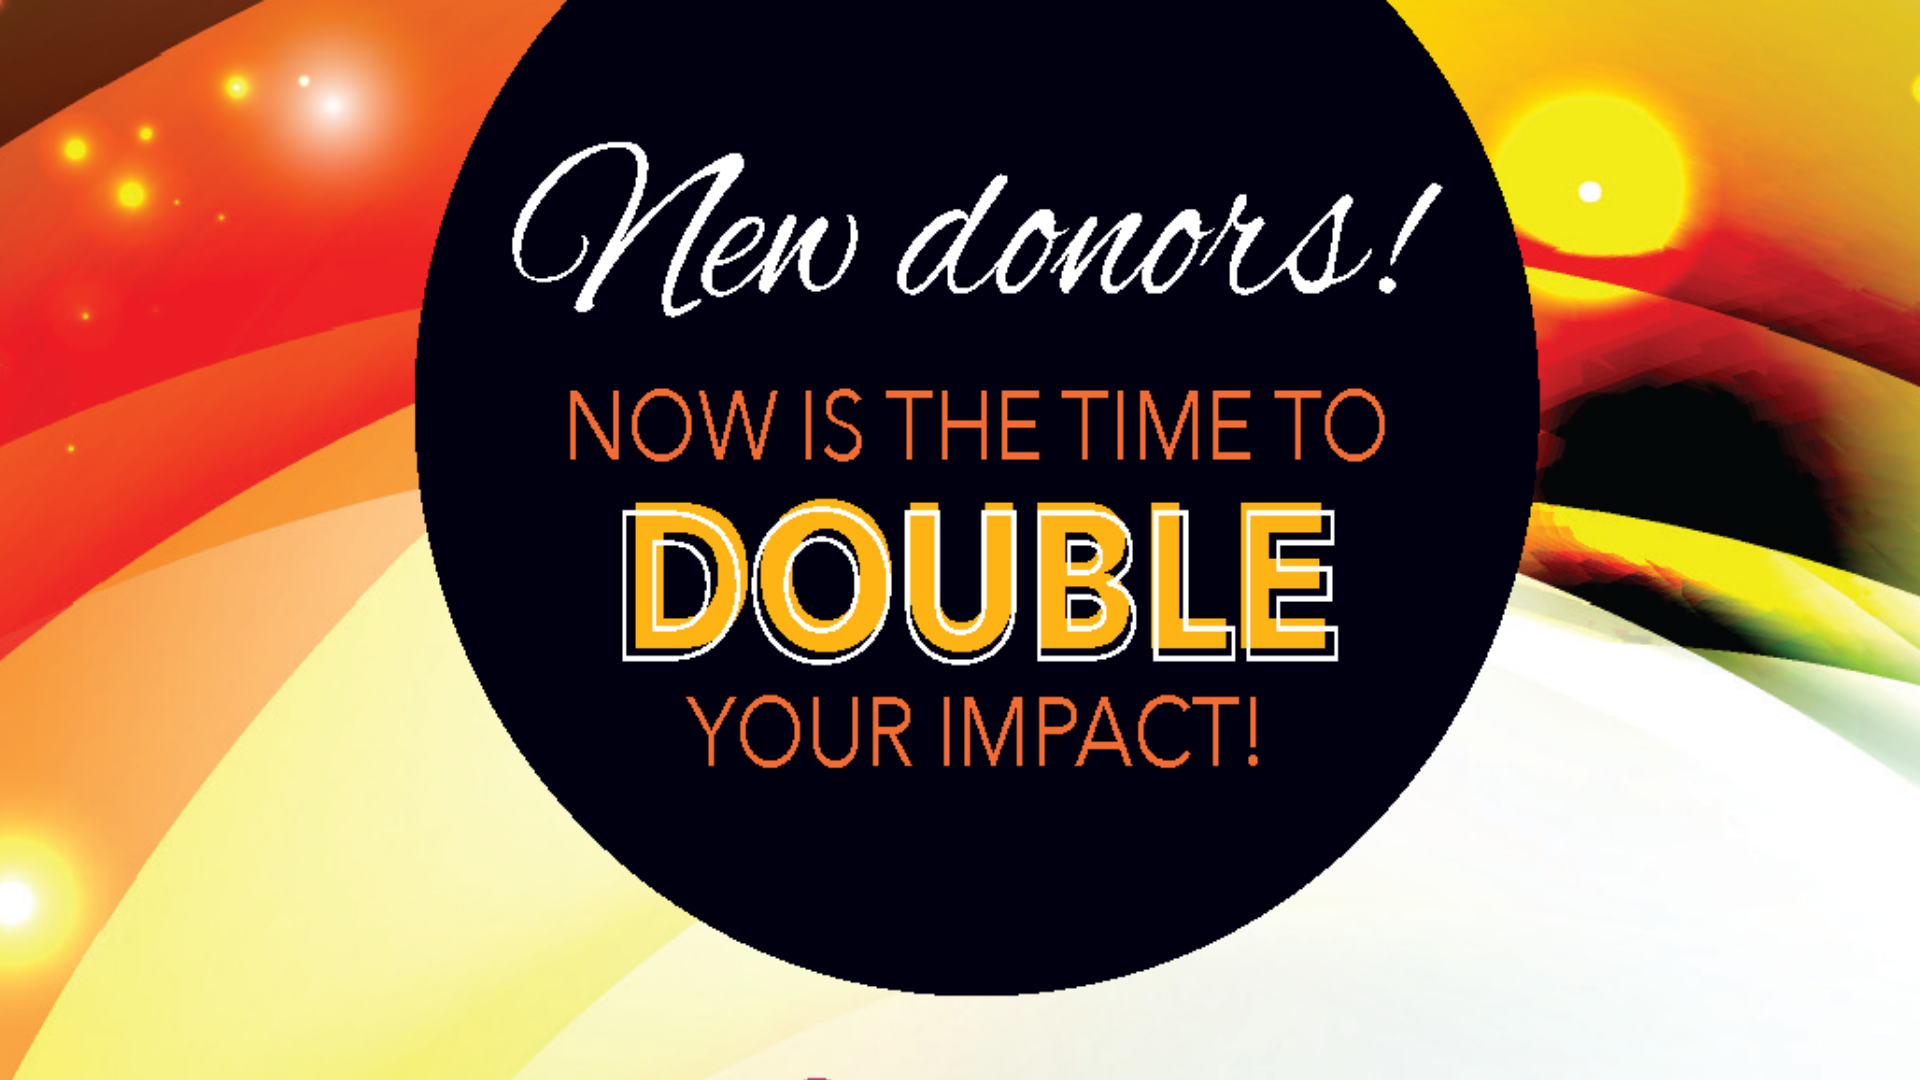 New donors! Now is the time to DOUBLE your impact!